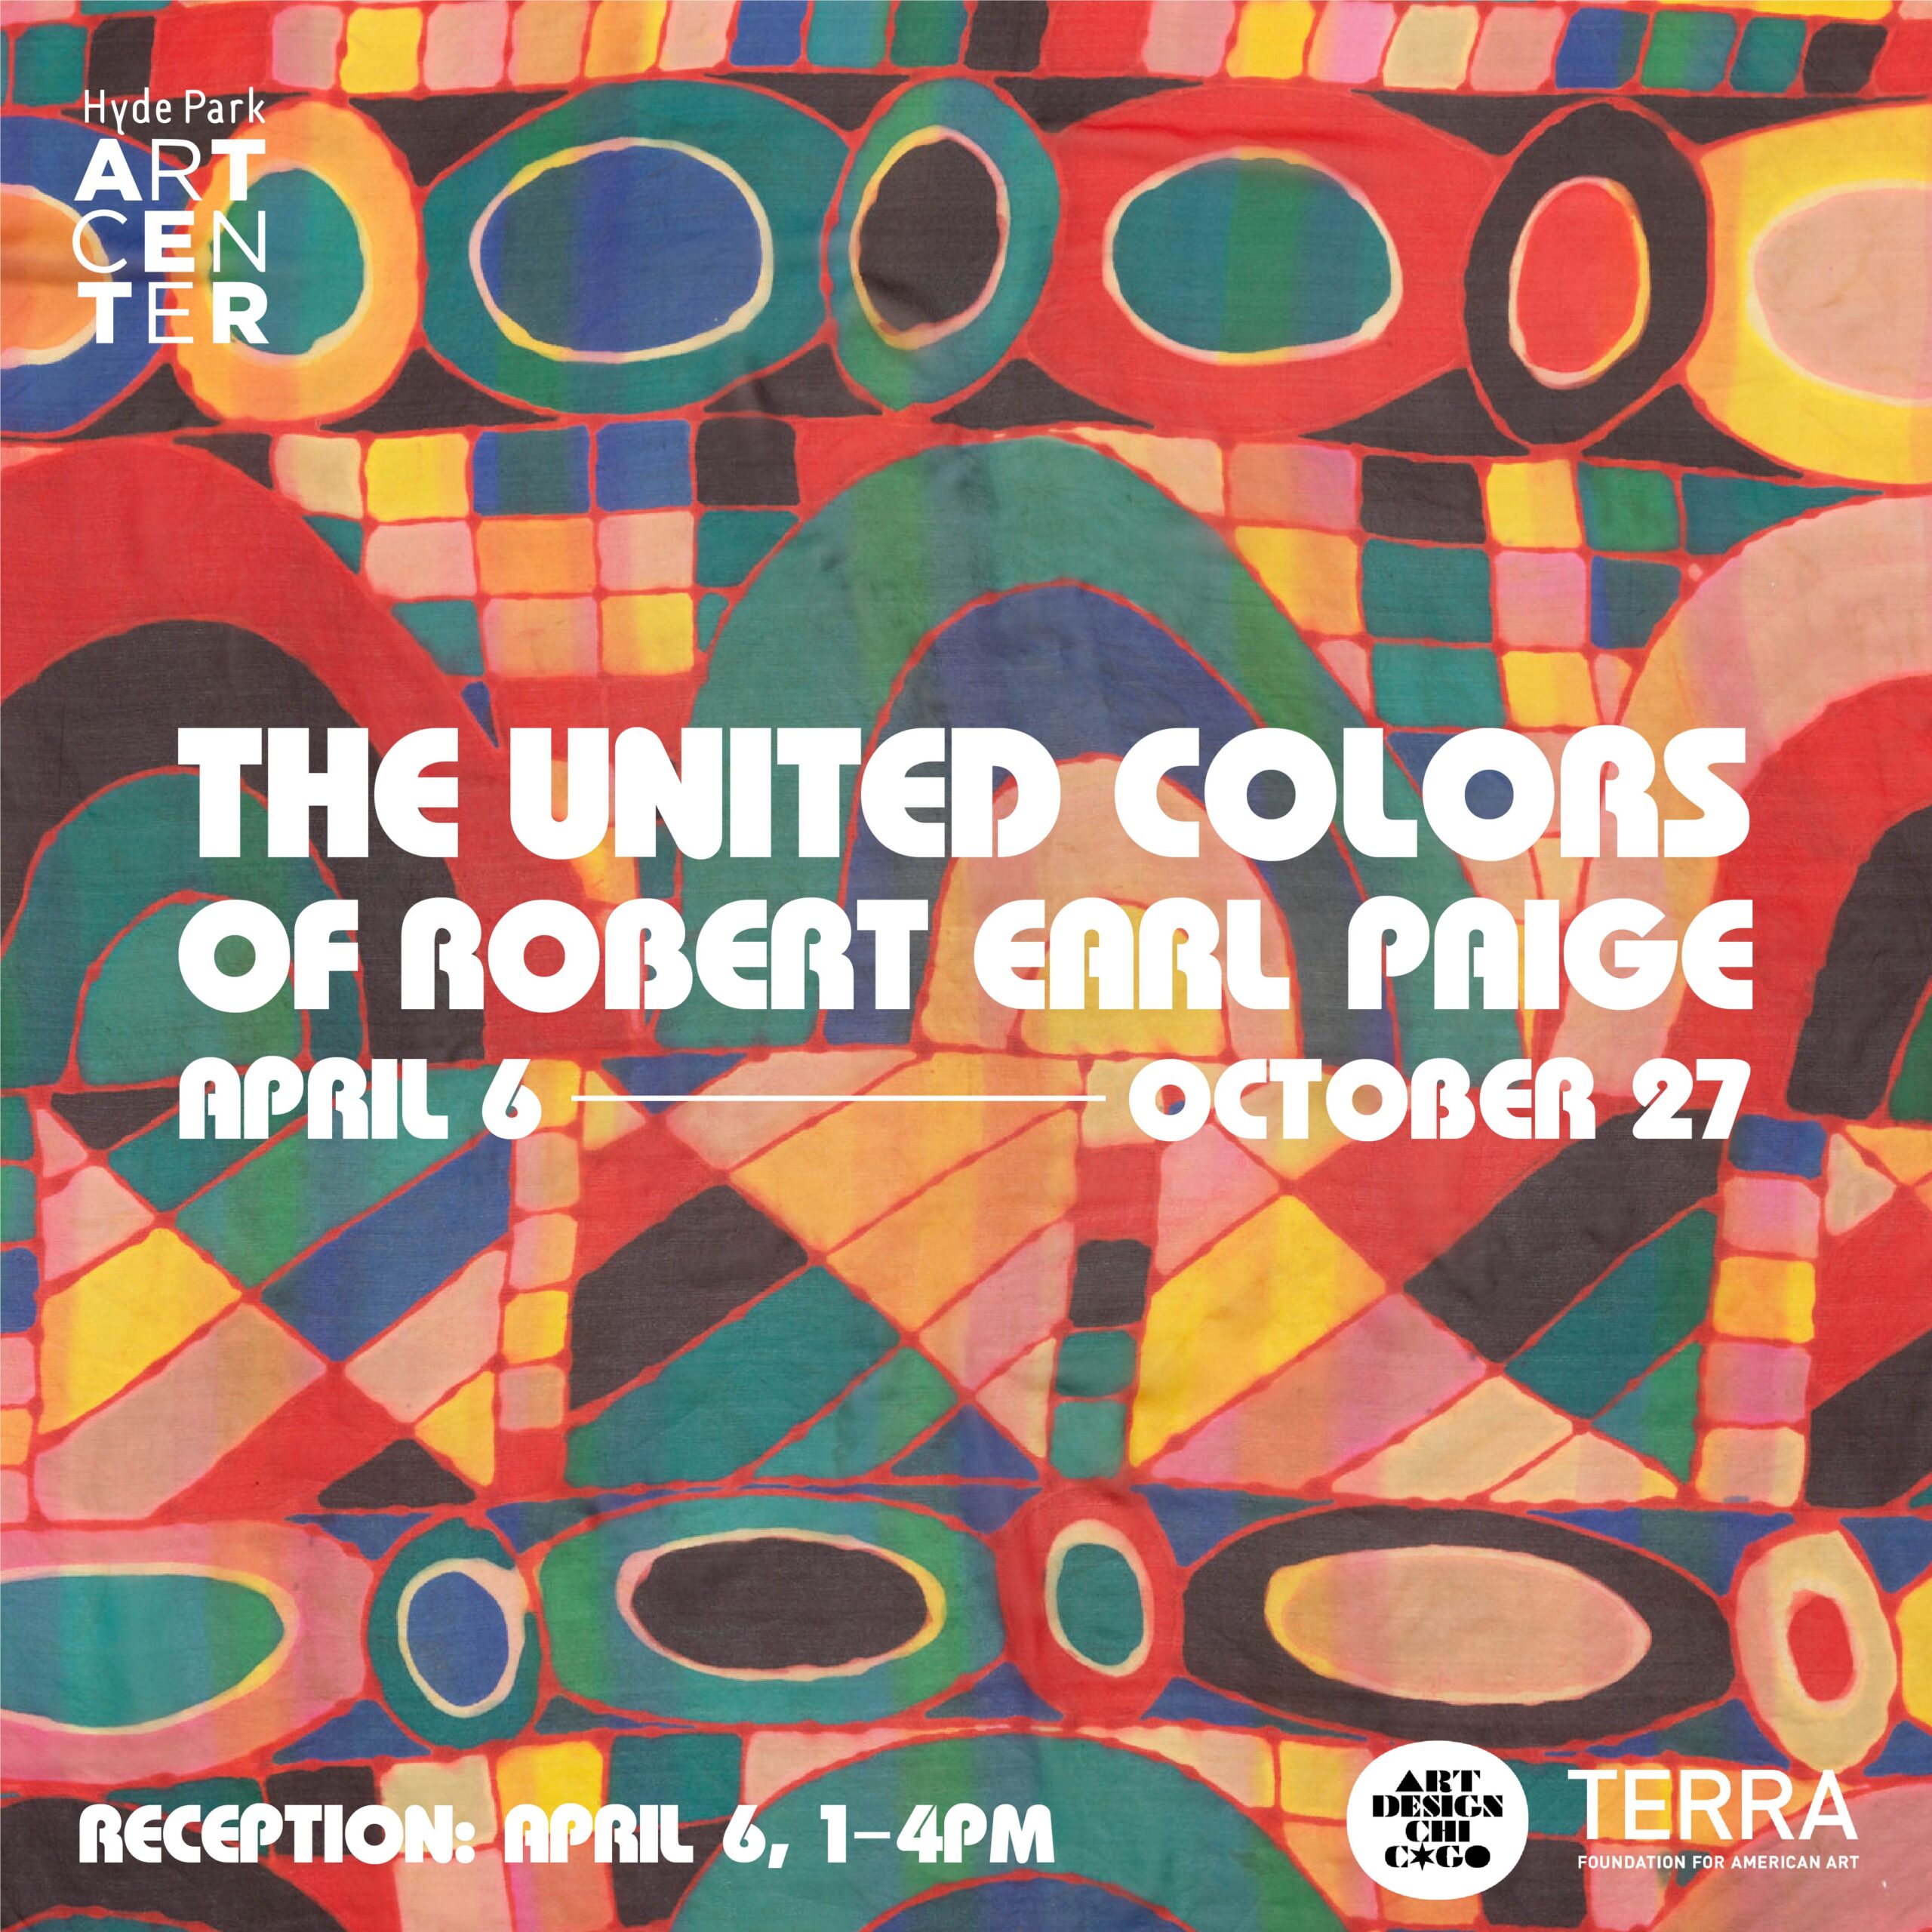 Background is a square silk scarf divided into three horizontal sections. Text on top states: "The United Colors of Robert Earl Paige, April 6 - October 27, Reception: April 6, 1-4pm. Hyde Park Art Center logo appears in upper left. Terra Foundation and Art Design Chicago logos in lower right.